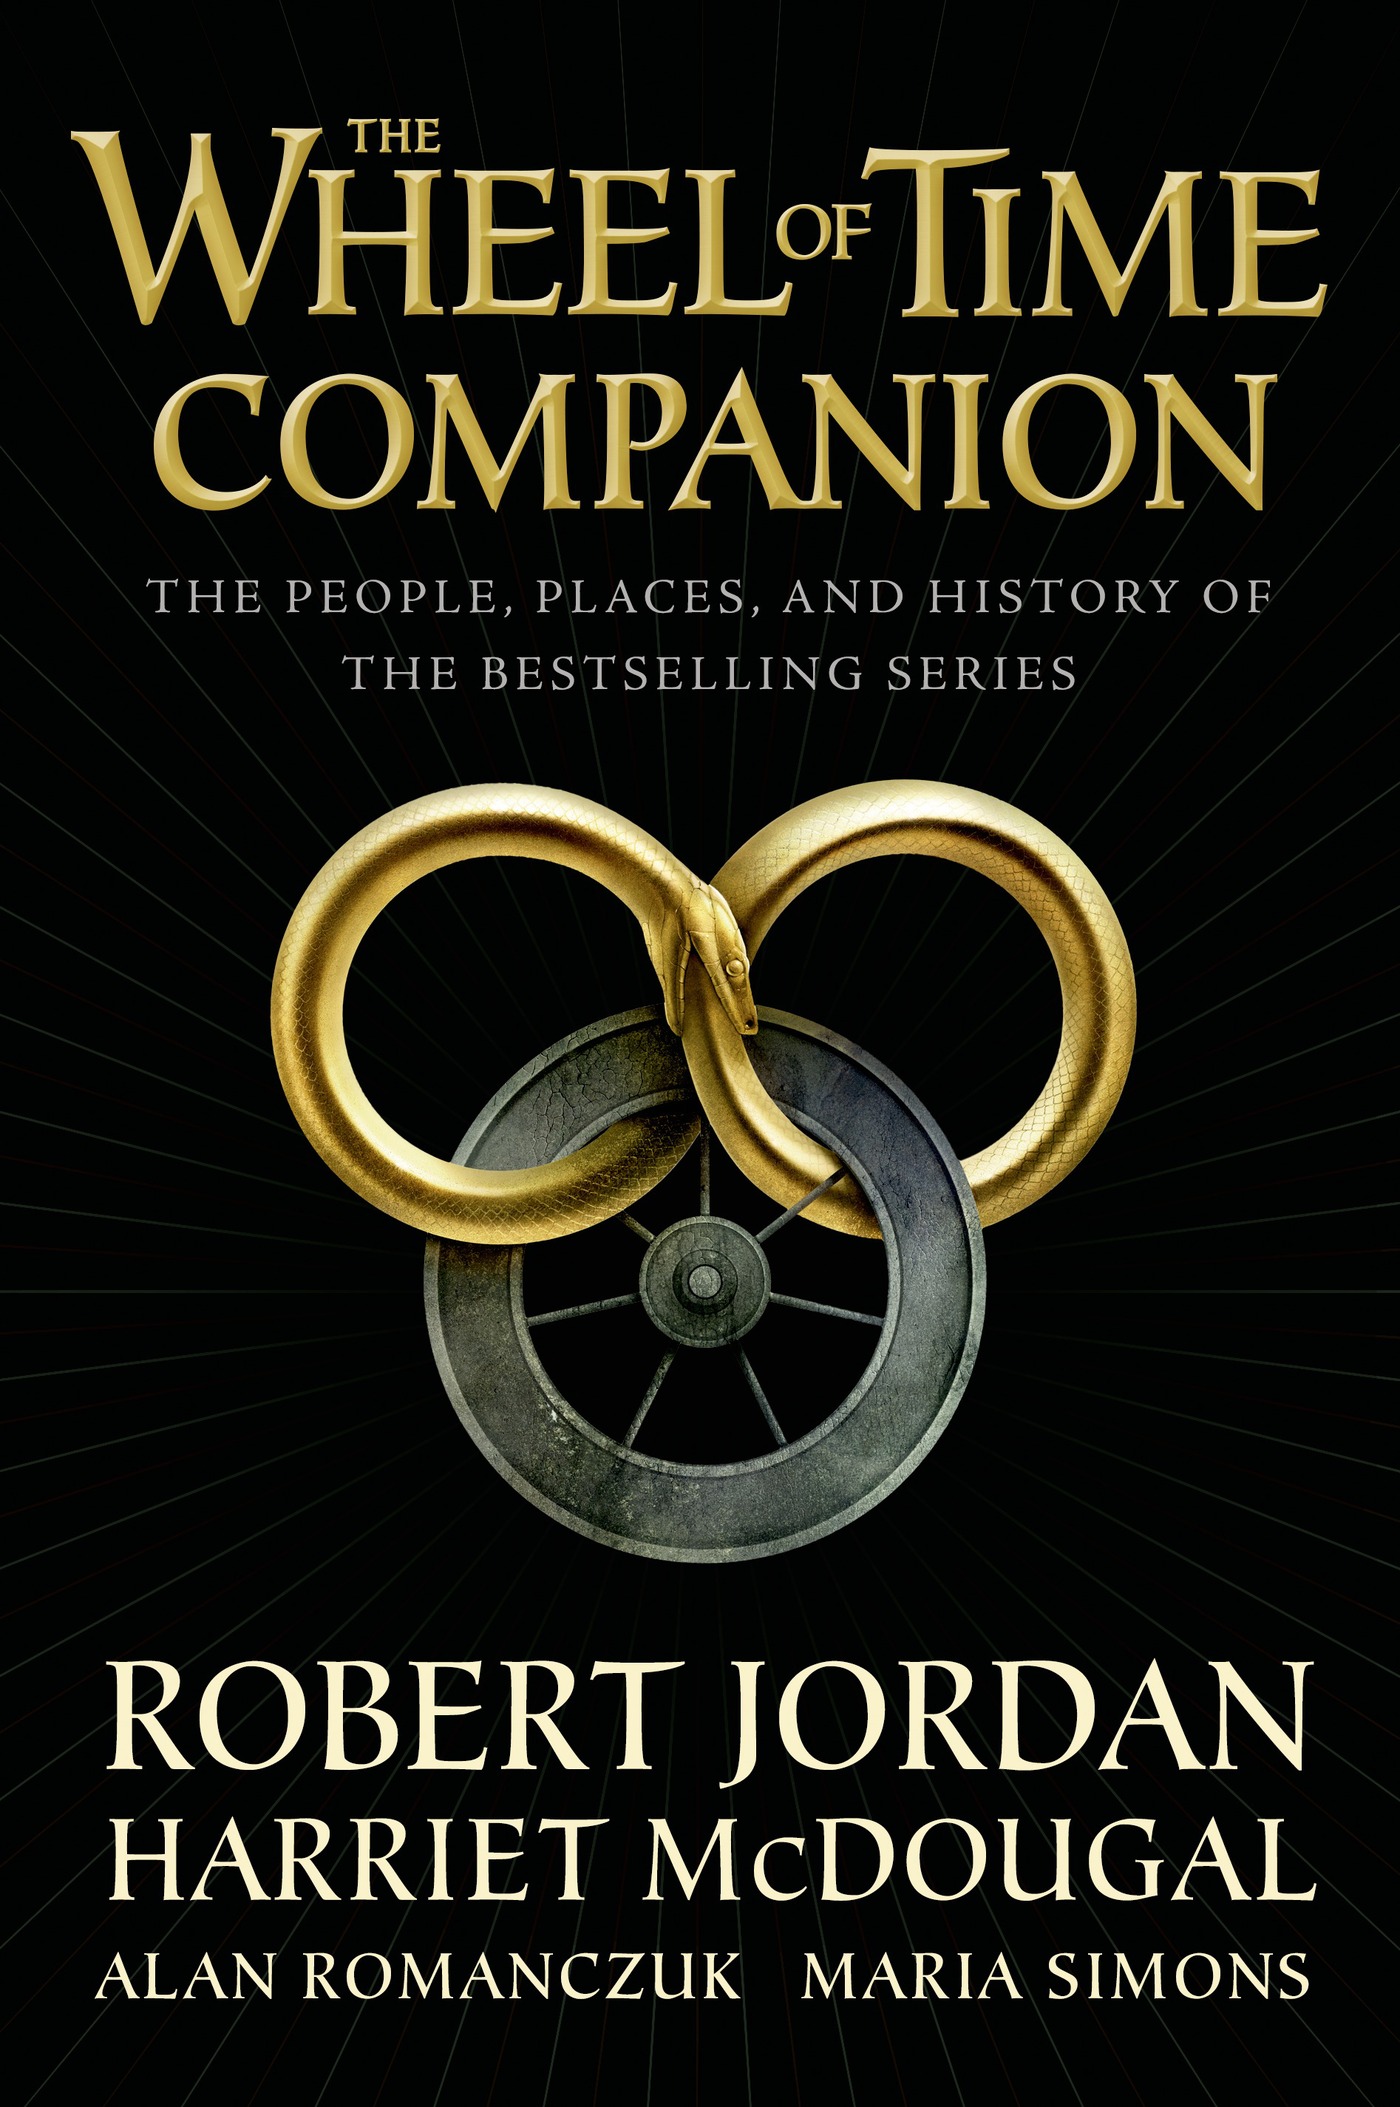 The Wheel of Time Companion : The People, Places, and History of the Bestselling Series by Robert Jordan, Harriet McDougal, Alan Romanczuk, Maria Simons